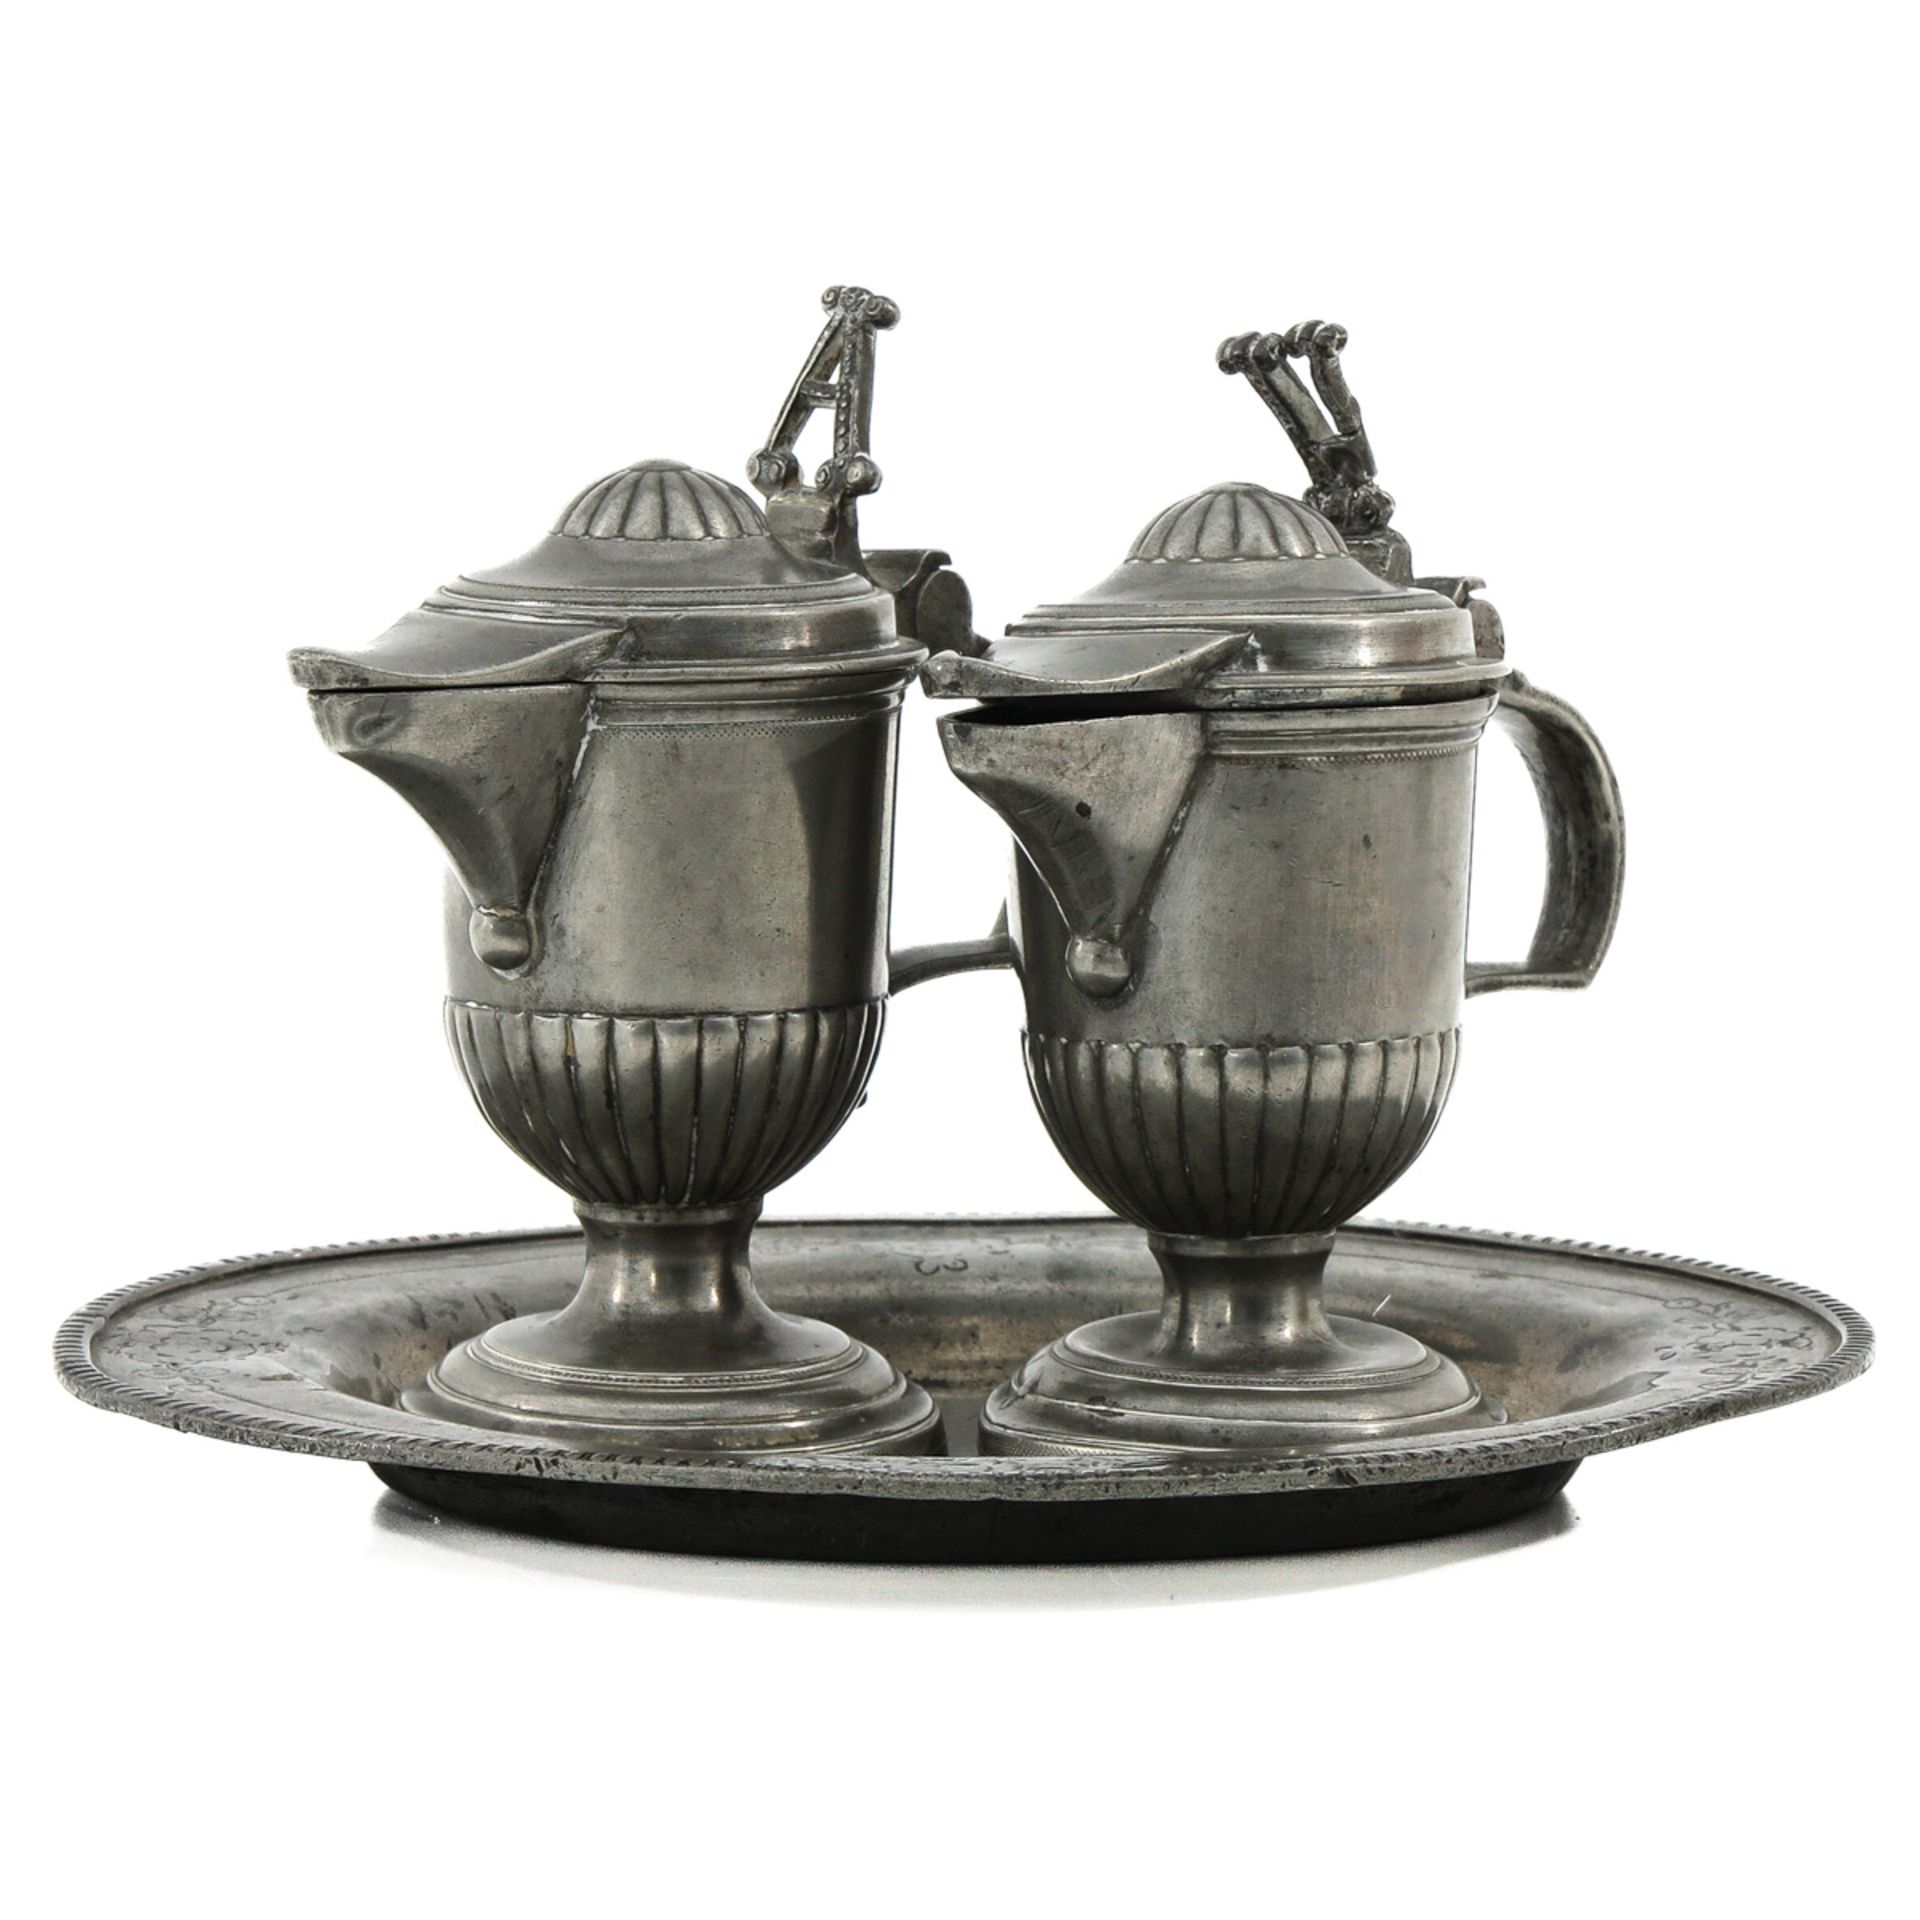 A Lot of 2 19th Century Water and Wine Set - Image 9 of 10